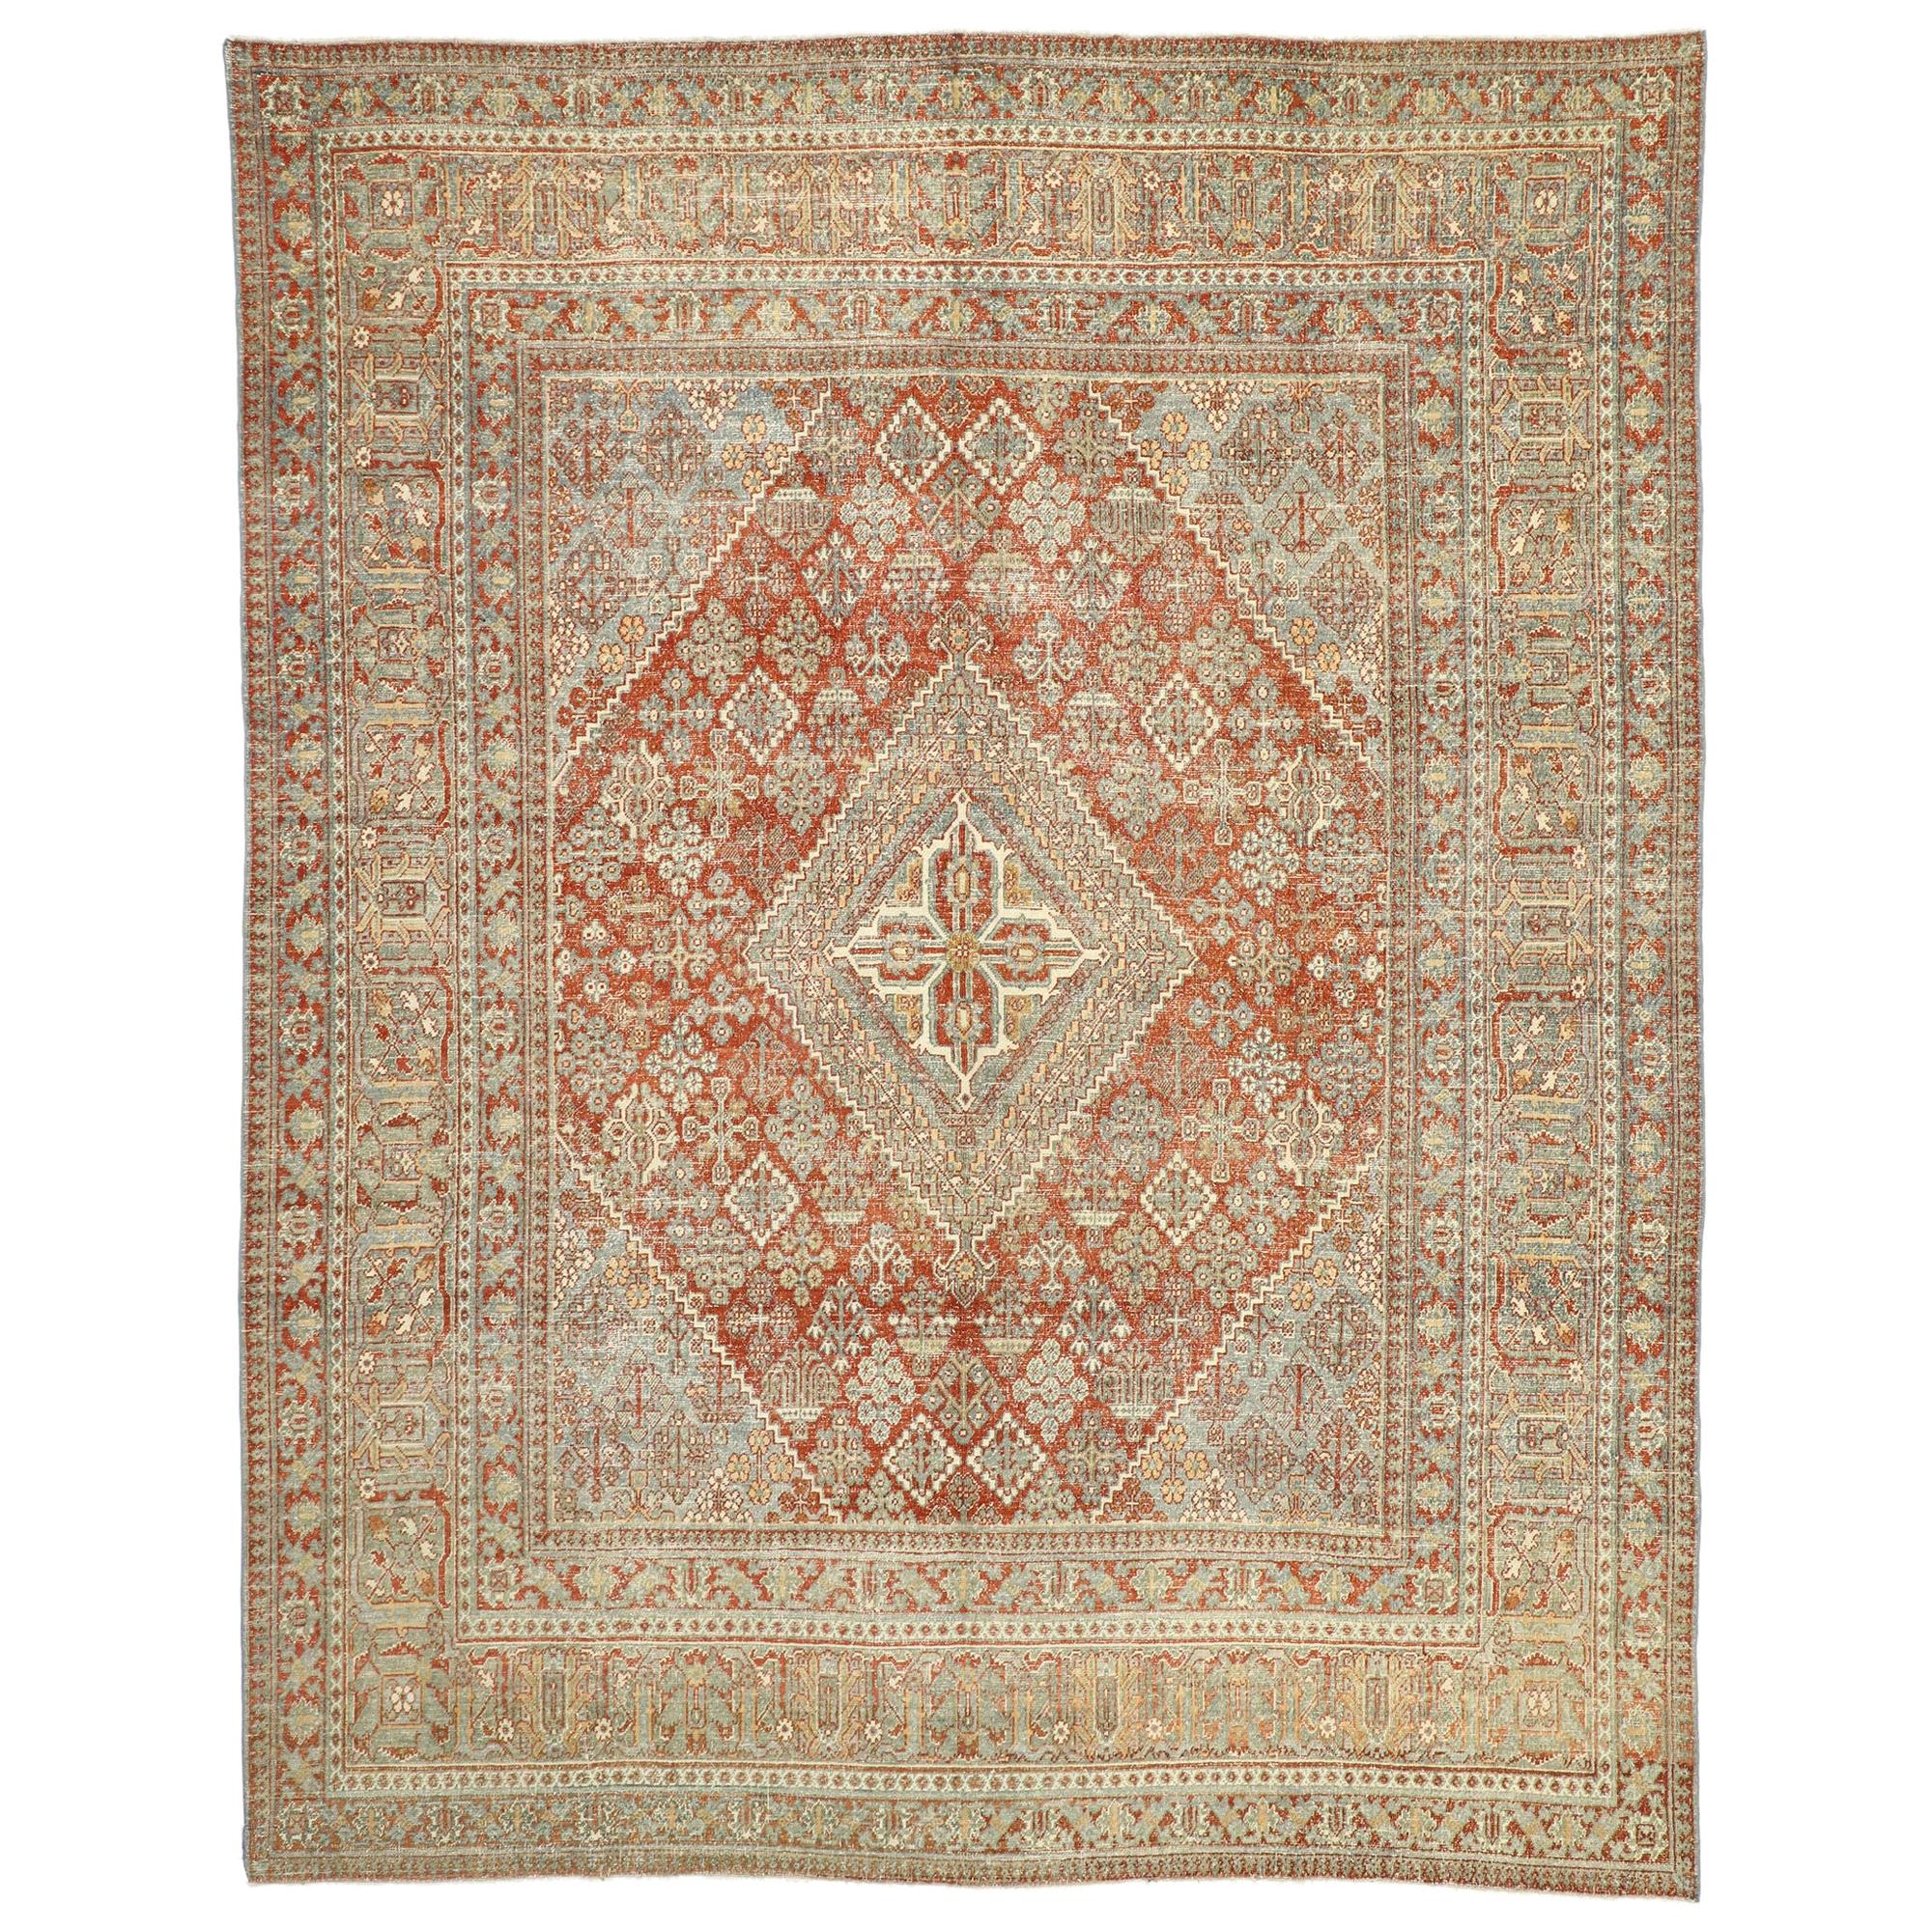 Distressed Antique Persian Joshegan Design Rug with Relaxed Rustic Federal Style